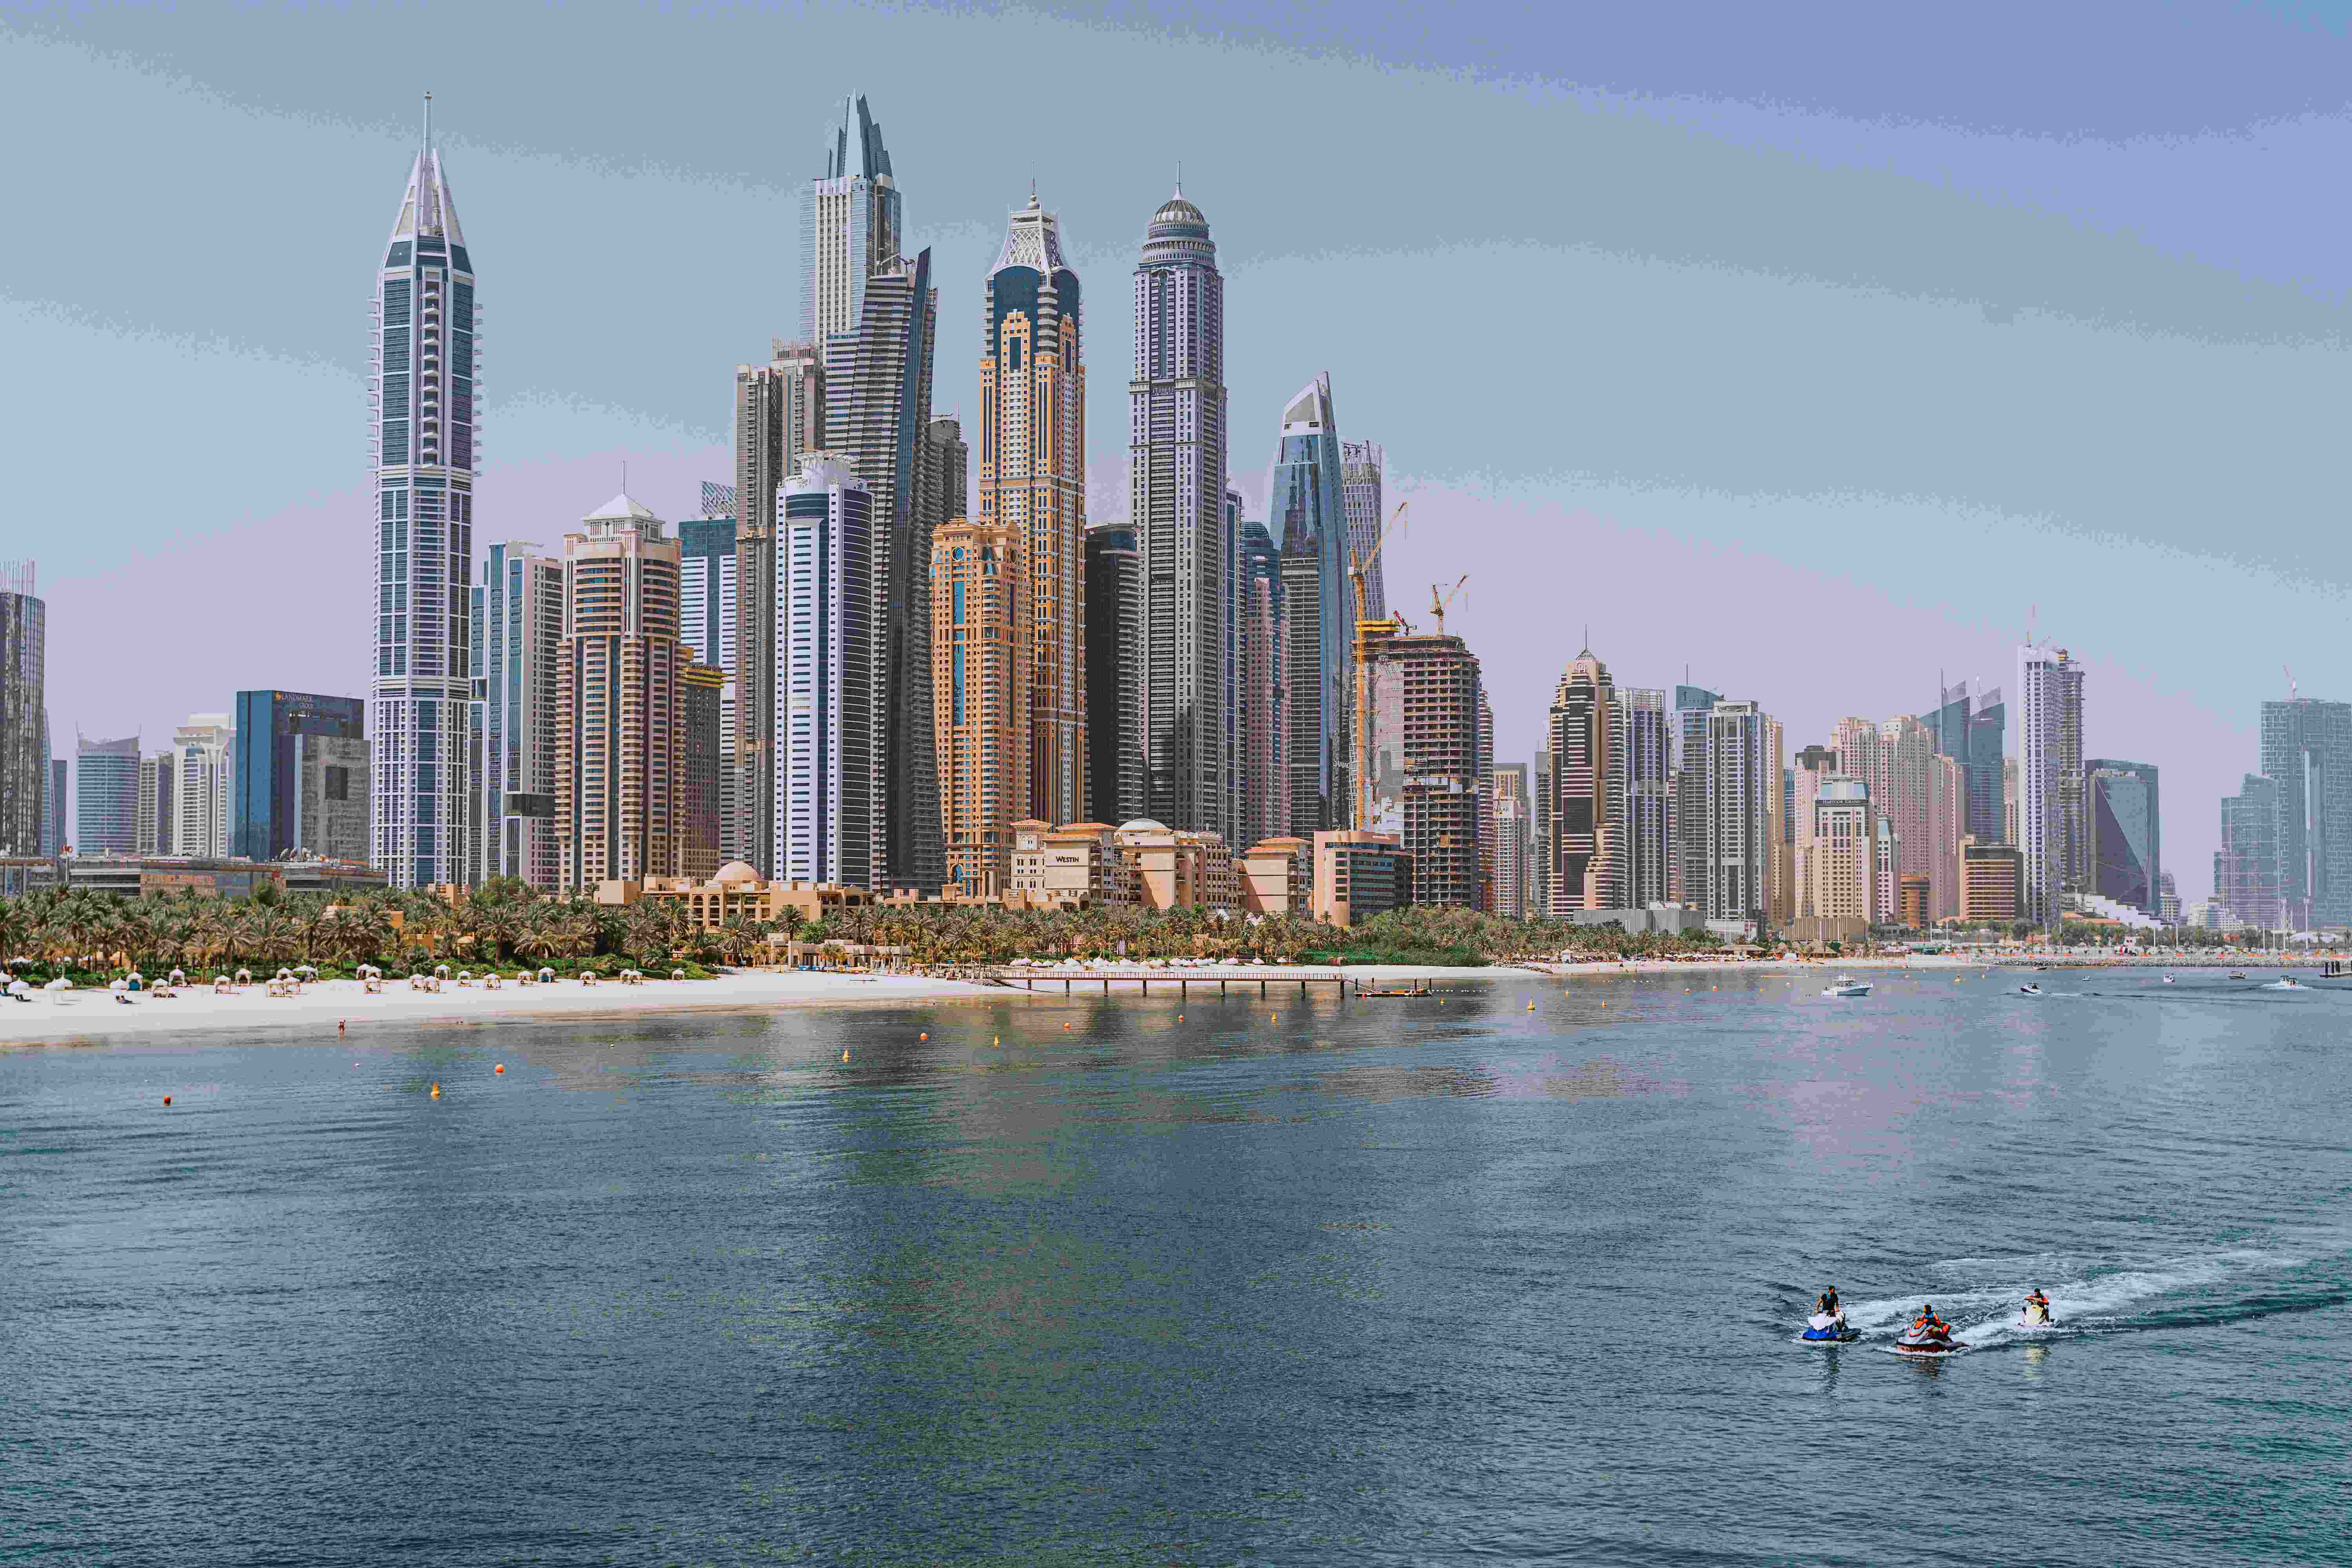 Experience Extravagance in 3 Nights: Immerse Yourself in the Splendor of Dubai